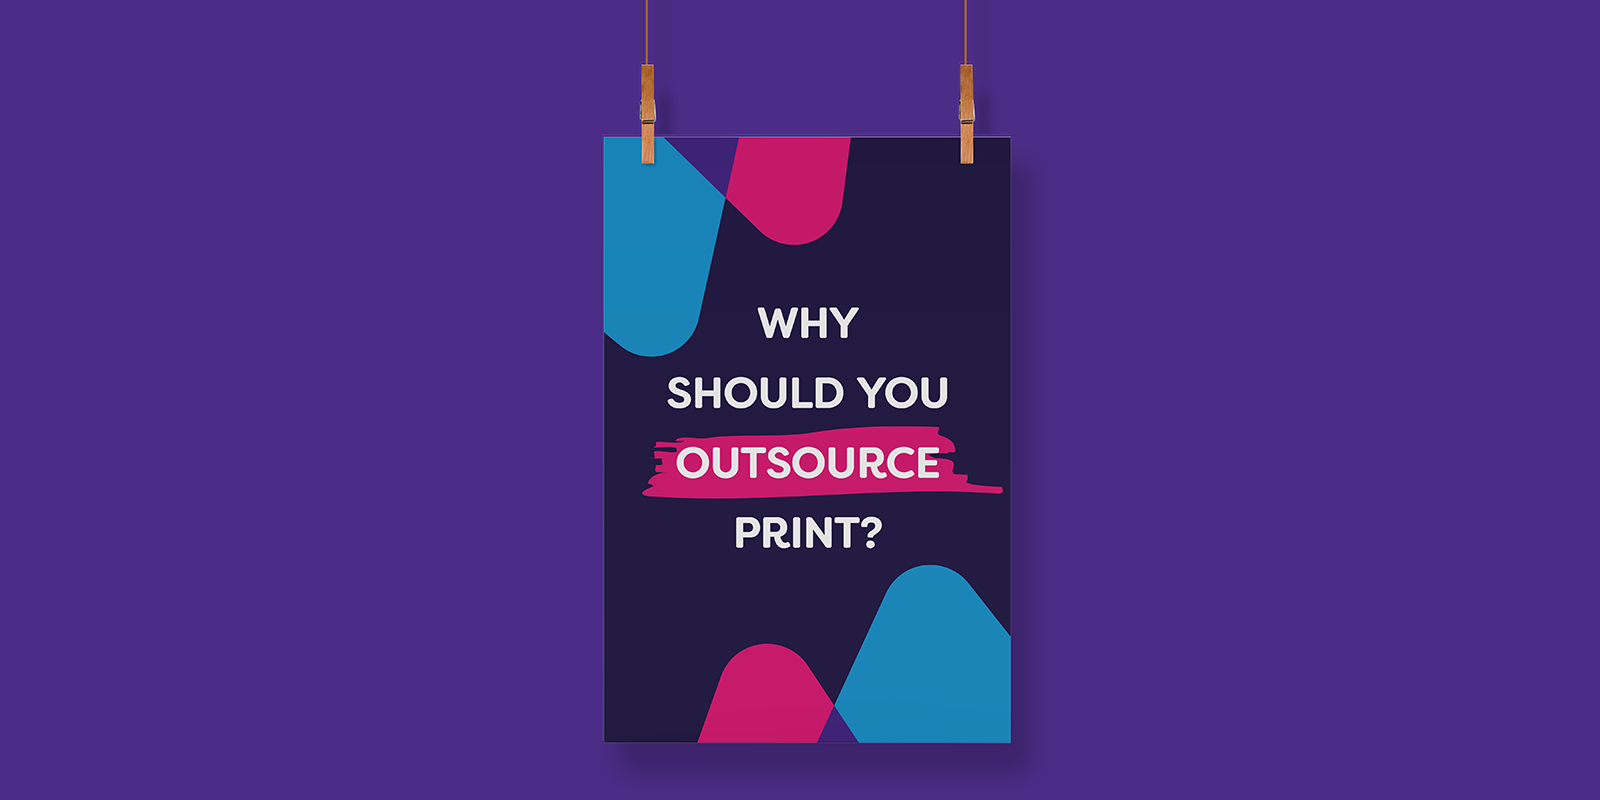 Benefits of Outsourcing Print